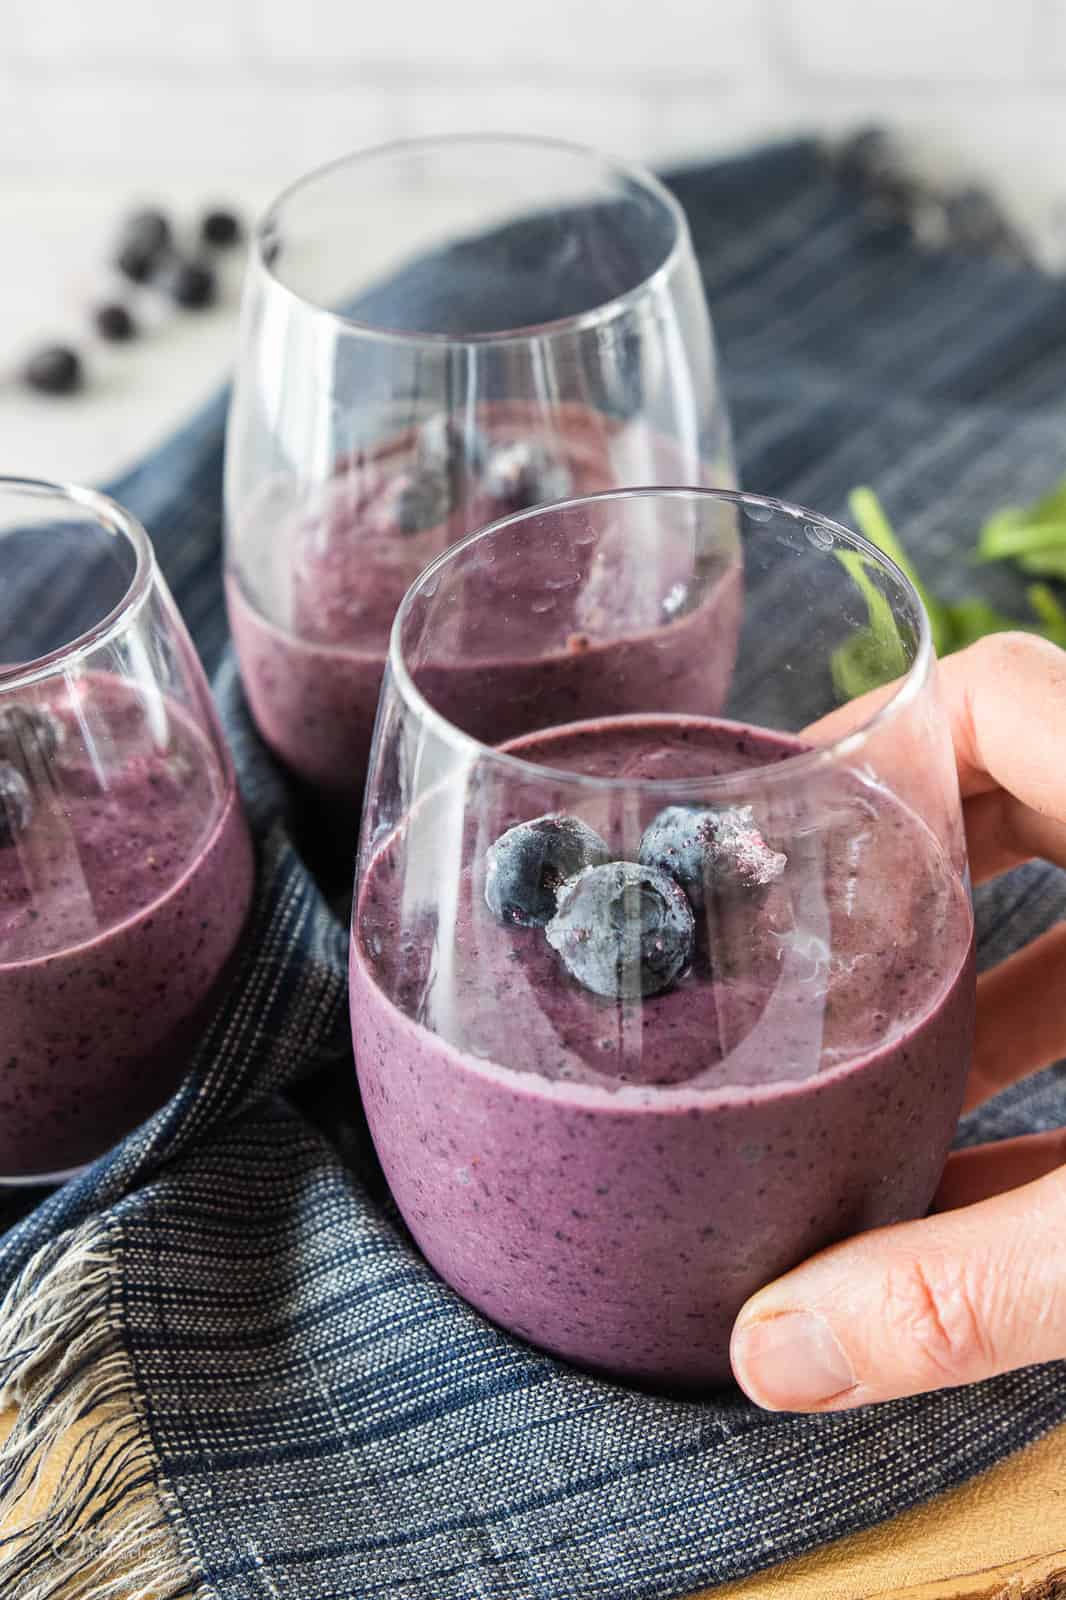 A high fiber blueberry spinach smoothie in a clear serving glass with a hand picking it up.